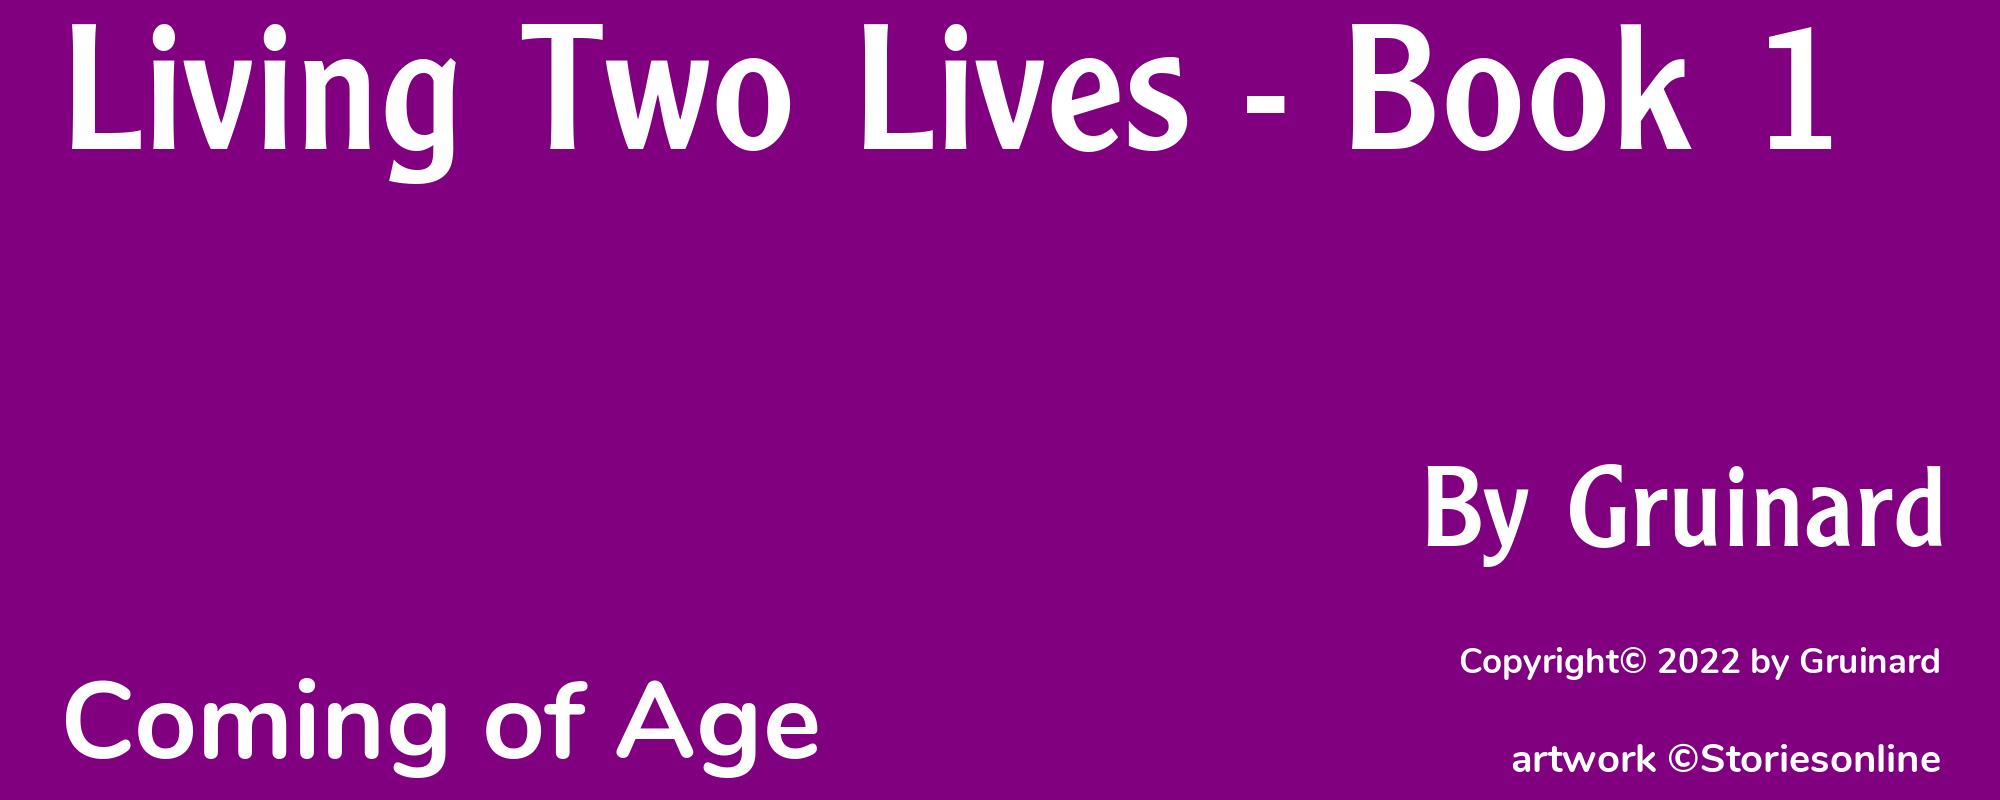 Living Two Lives - Book 1 - Cover